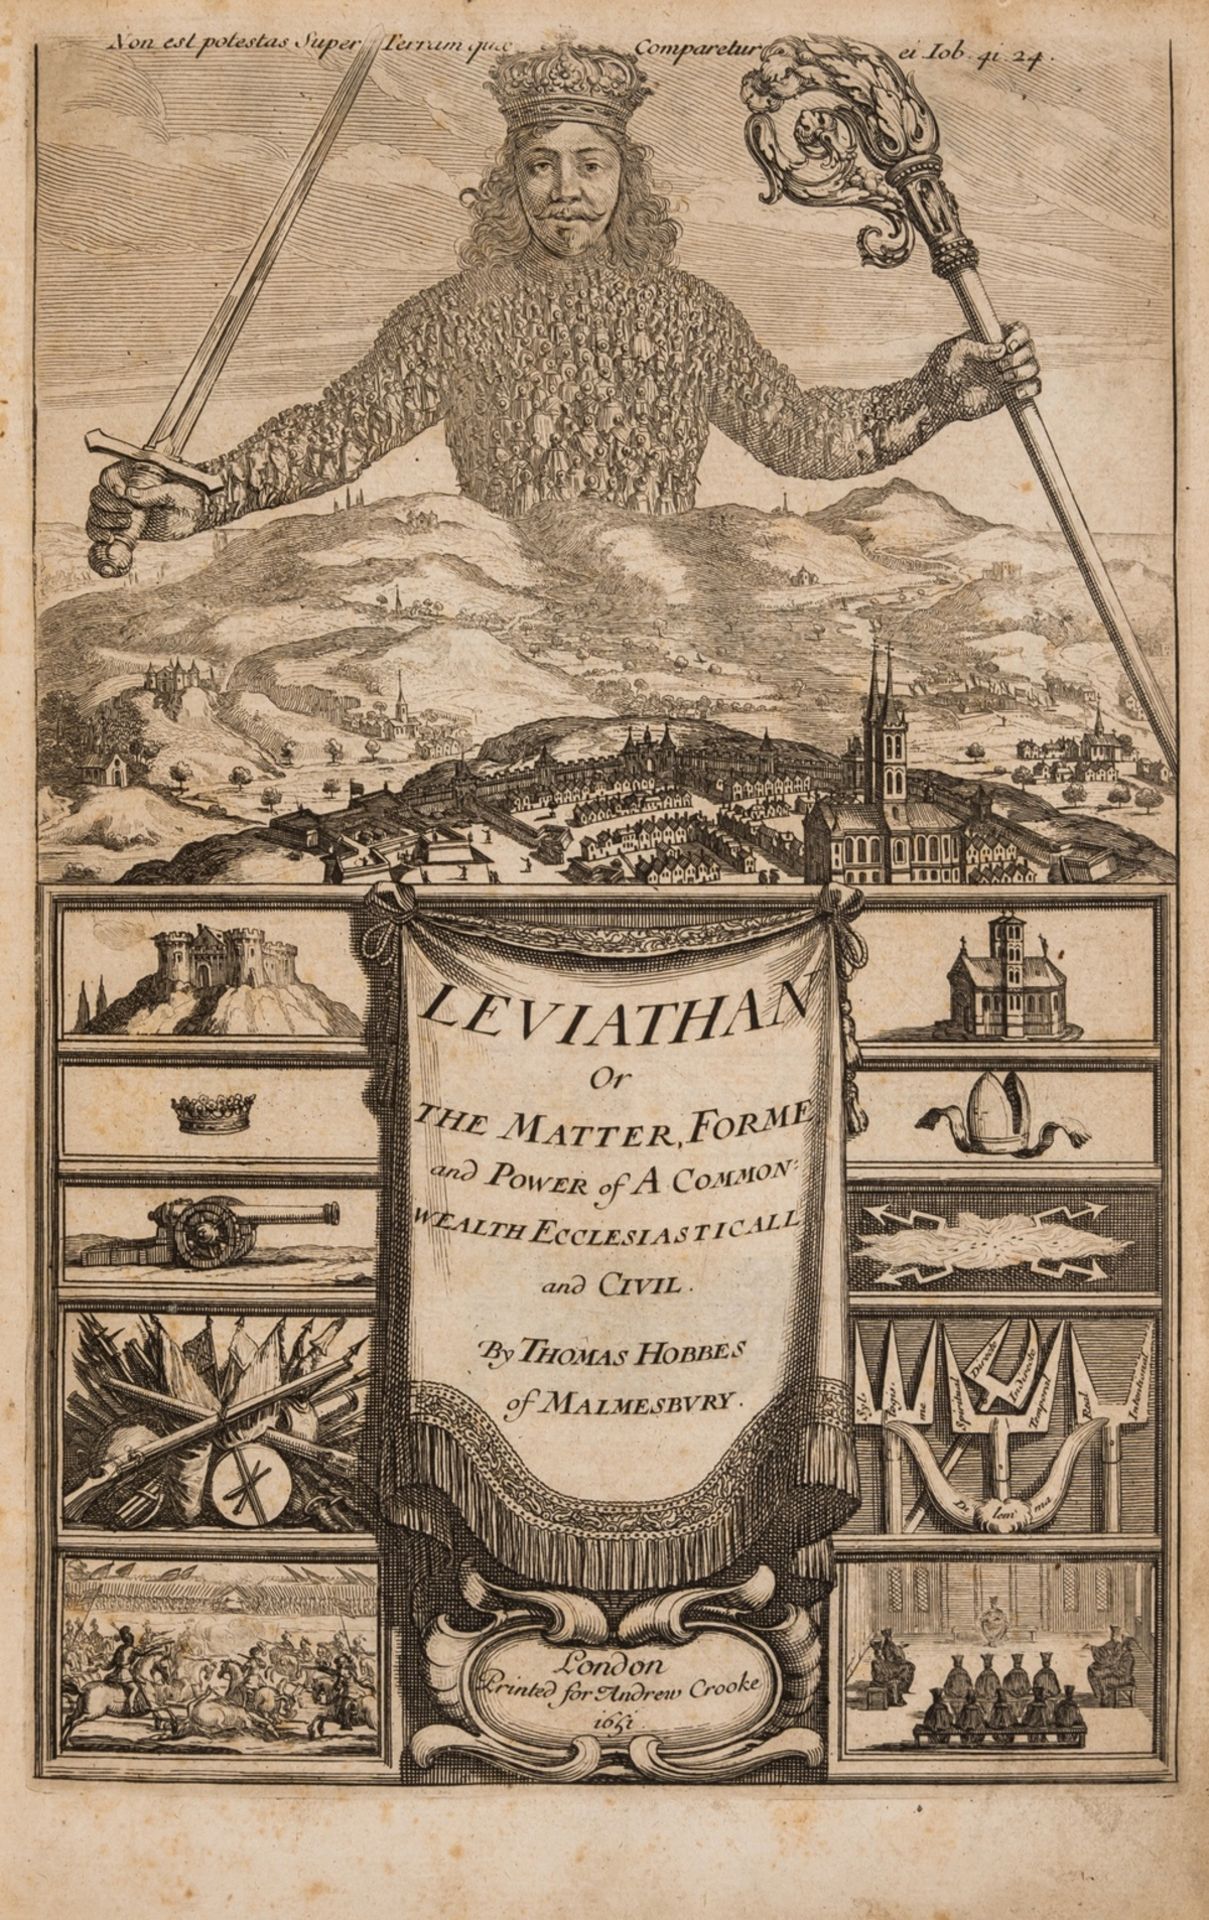 Hobbes (Thomas) Leviathan, or The Matter, Forme & Power of a Common-Wealth, first edition, first …